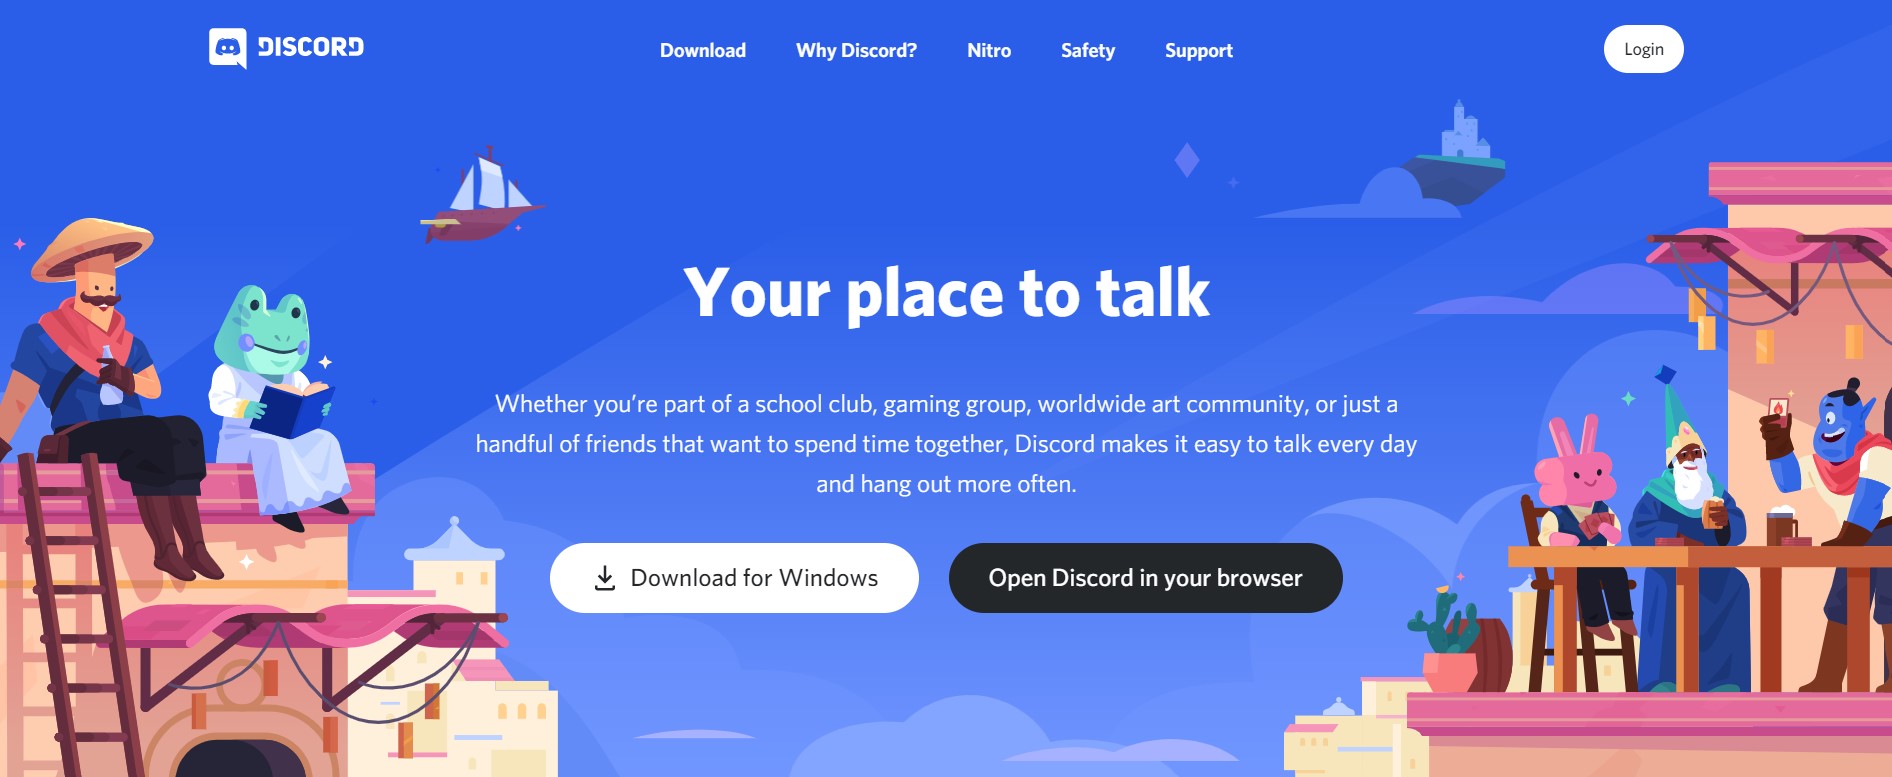 discord clubhouse feature, clubhouse like feature in discord, discord stage channel, discord clubhouse alternative